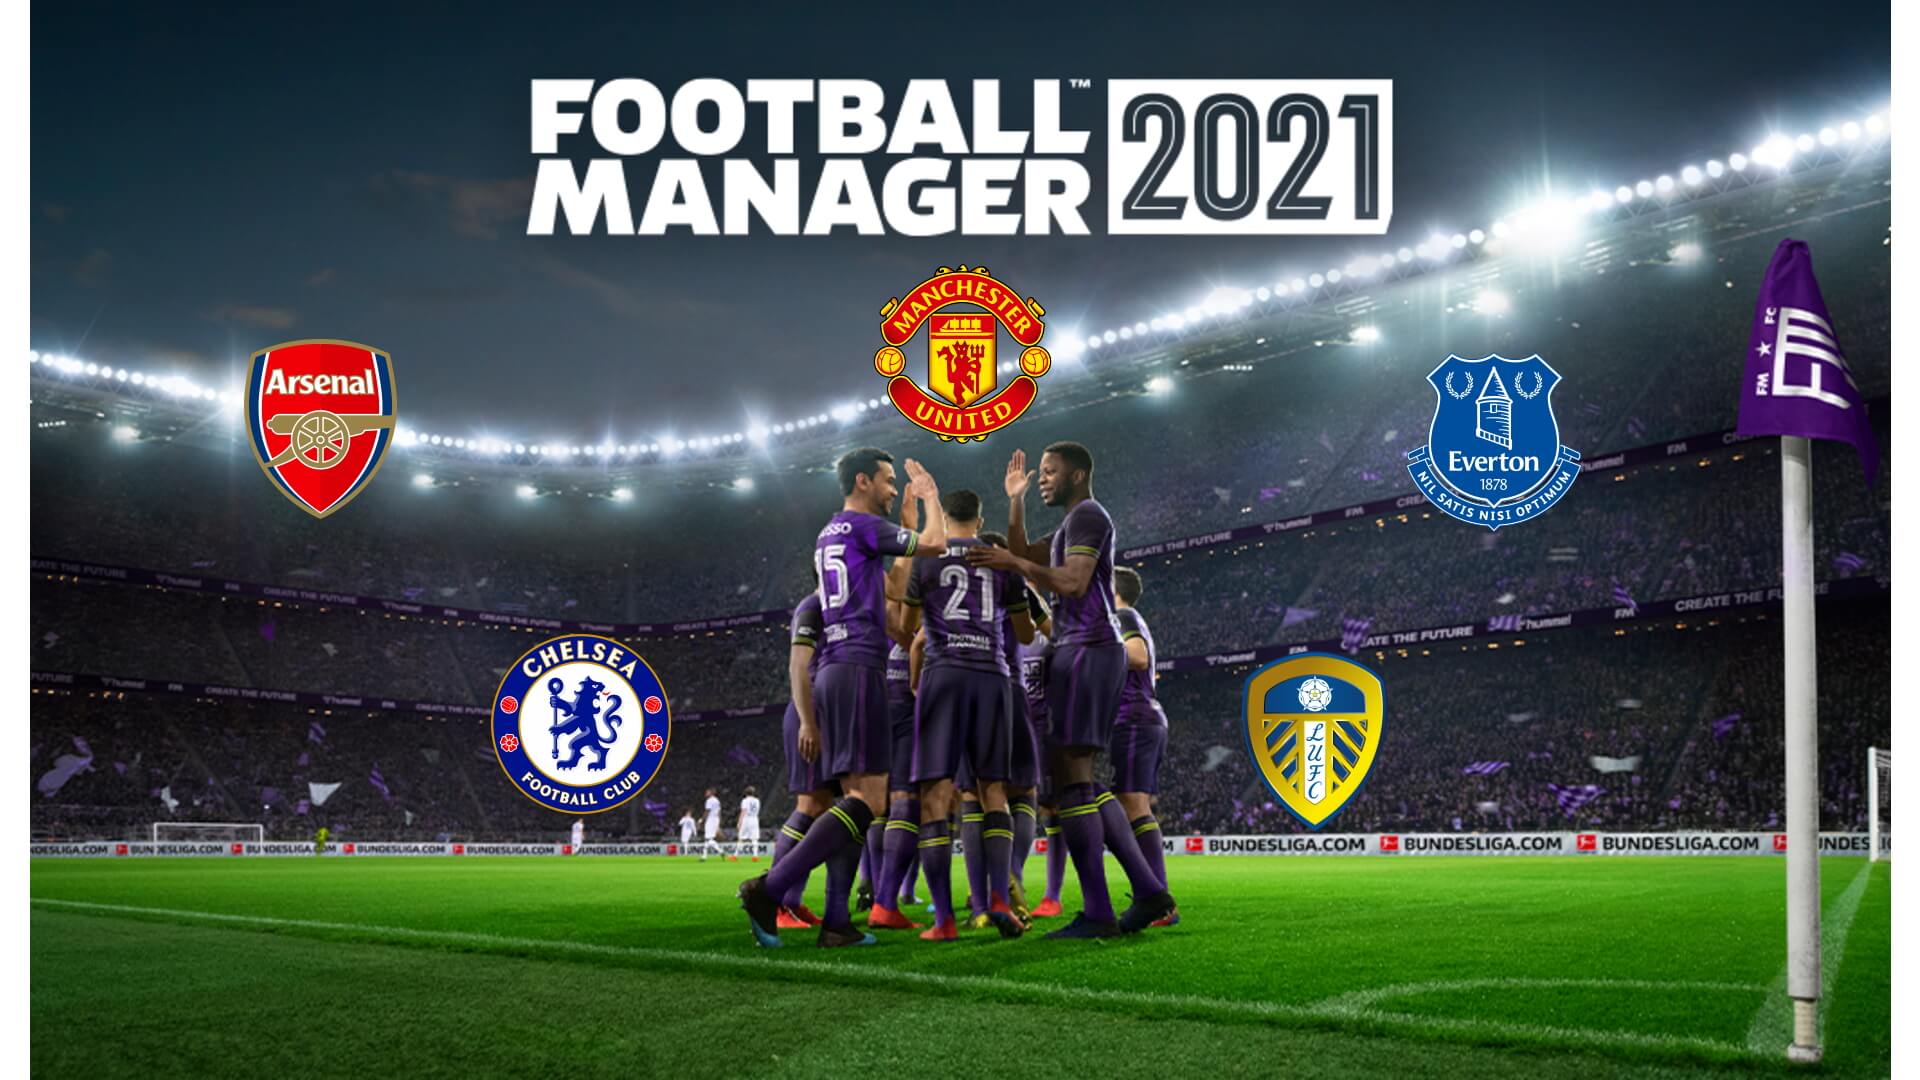 Football Manager 2020 badges: How to install and download the best